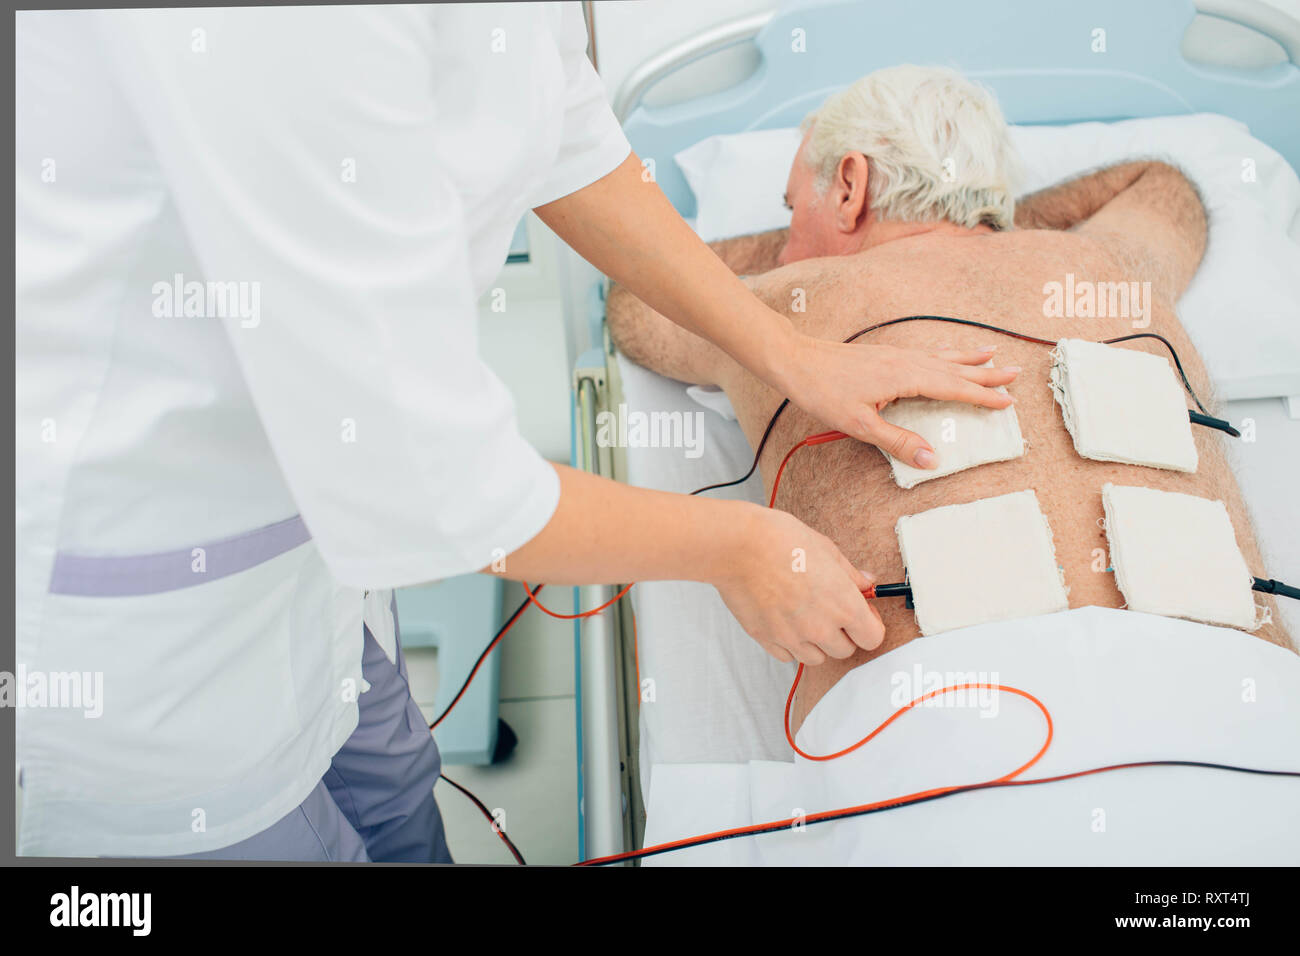 Physiotherapeutic treatment. Senior patient having ultrasound and electrotherapy treatment on his back Stock Photo